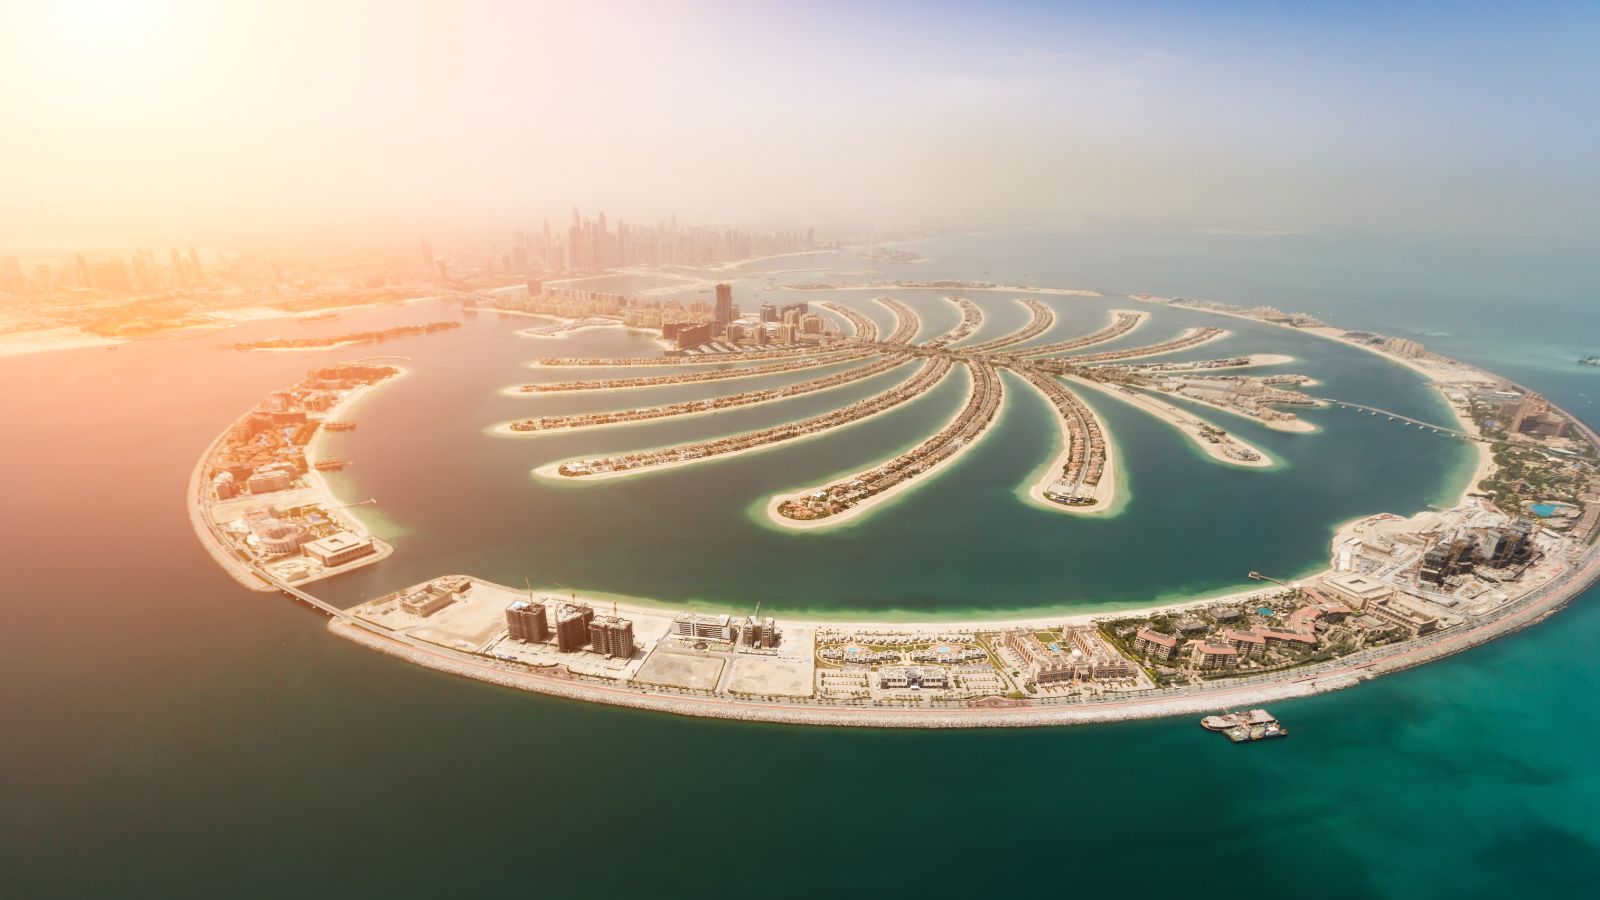 Why should l buy a property in Dubai?